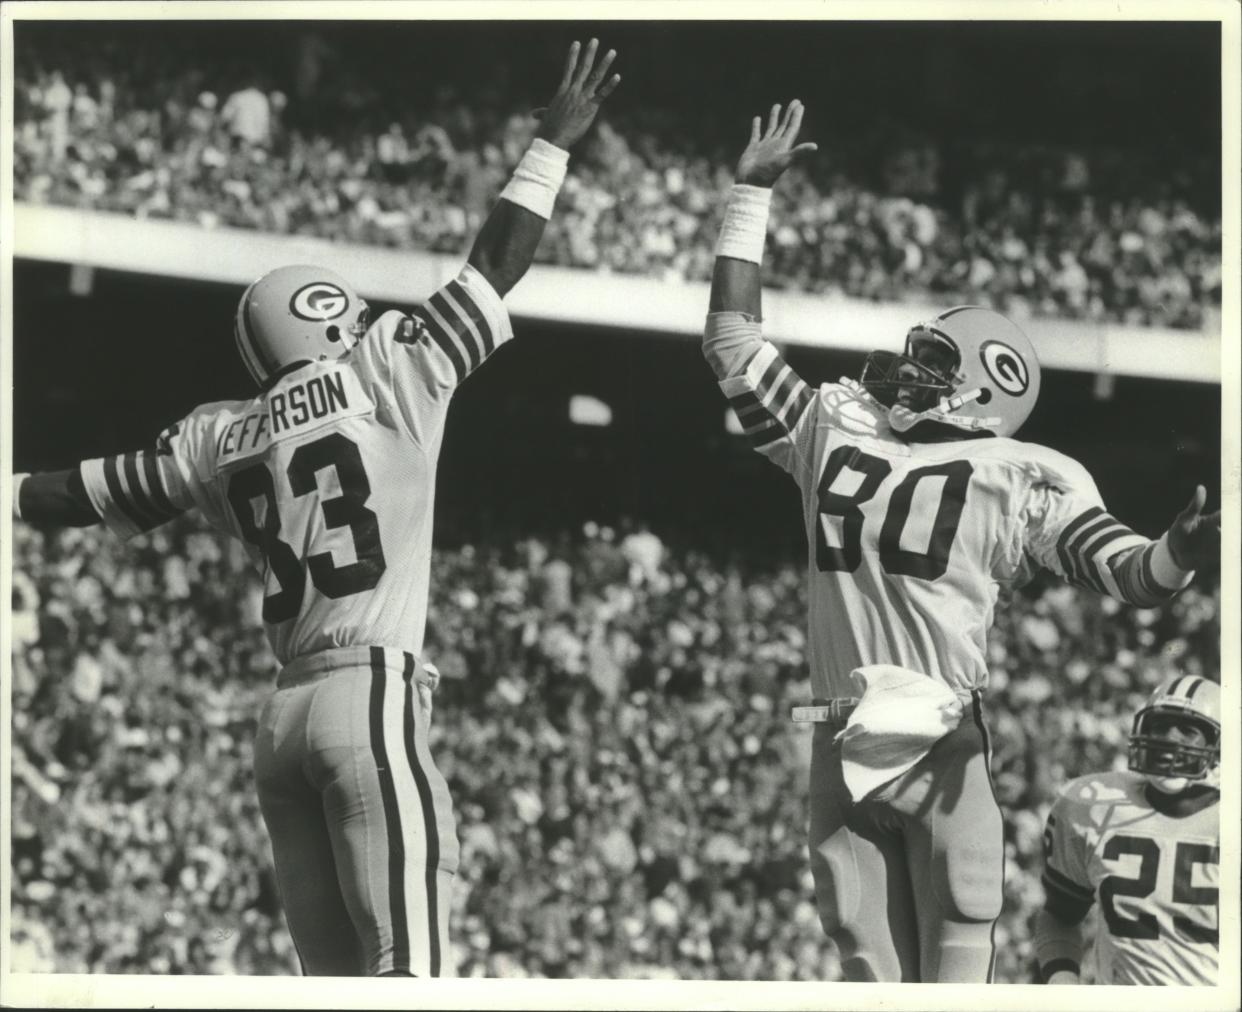 John Jefferson and James Lofton were a big part of the equation for the 1982 Packers.